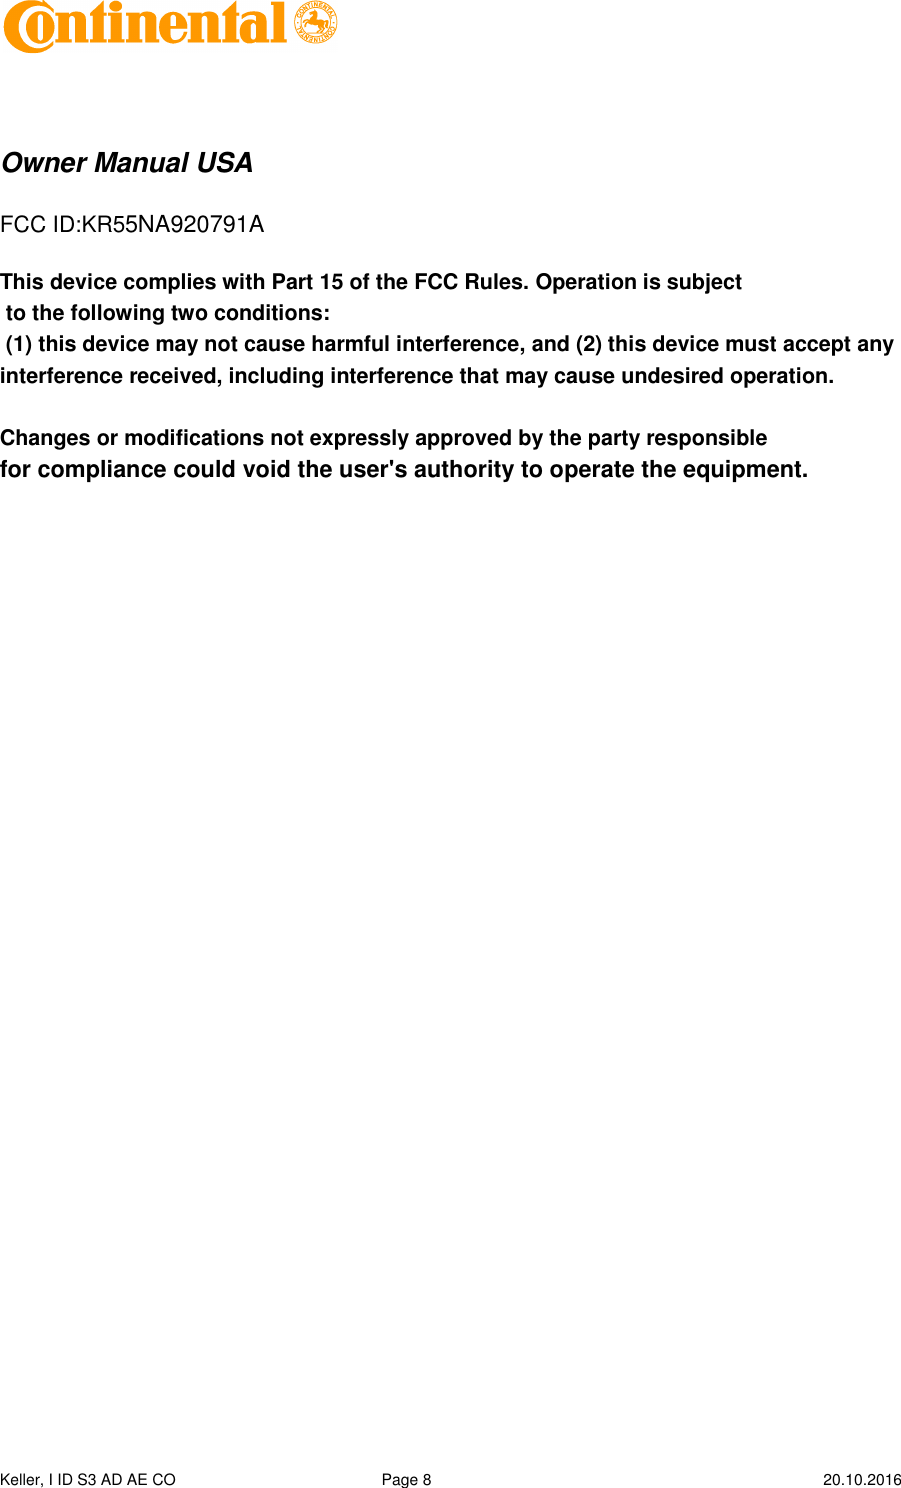  Keller, I ID S3 AD AE CO  Page 8    20.10.2016      Owner Manual USA  FCC ID:KR55NA920791A  This device complies with Part 15 of the FCC Rules. Operation is subject  to the following two conditions:  (1) this device may not cause harmful interference, and (2) this device must accept any interference received, including interference that may cause undesired operation.   Changes or modifications not expressly approved by the party responsible  for compliance could void the user&apos;s authority to operate the equipment.      